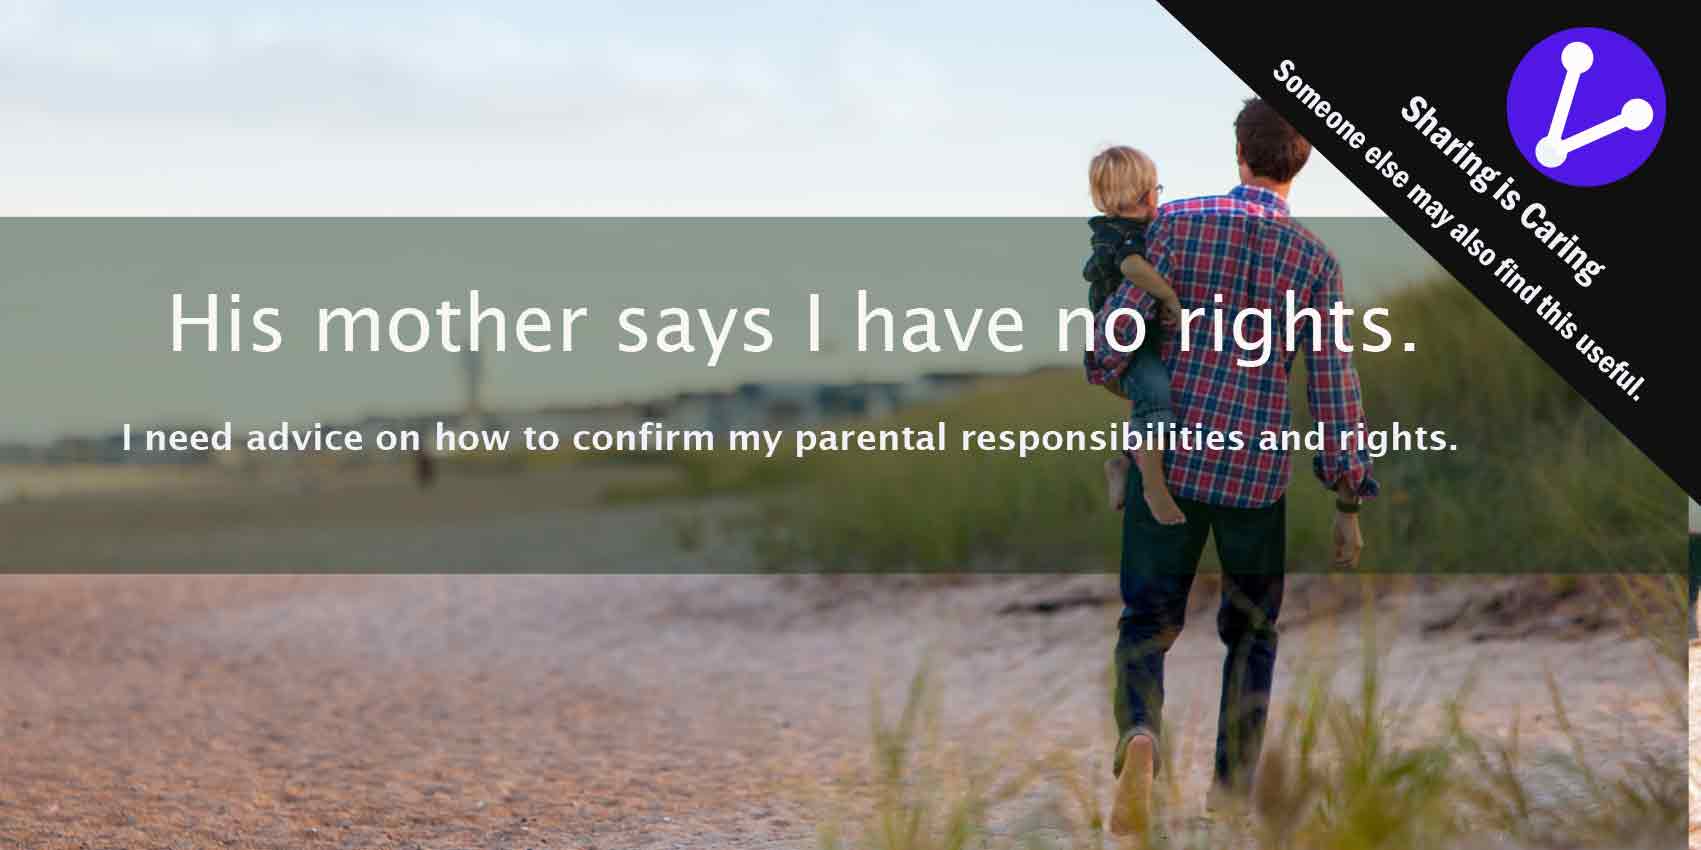 confirm parental responsibilities and rights child father mother refuses court